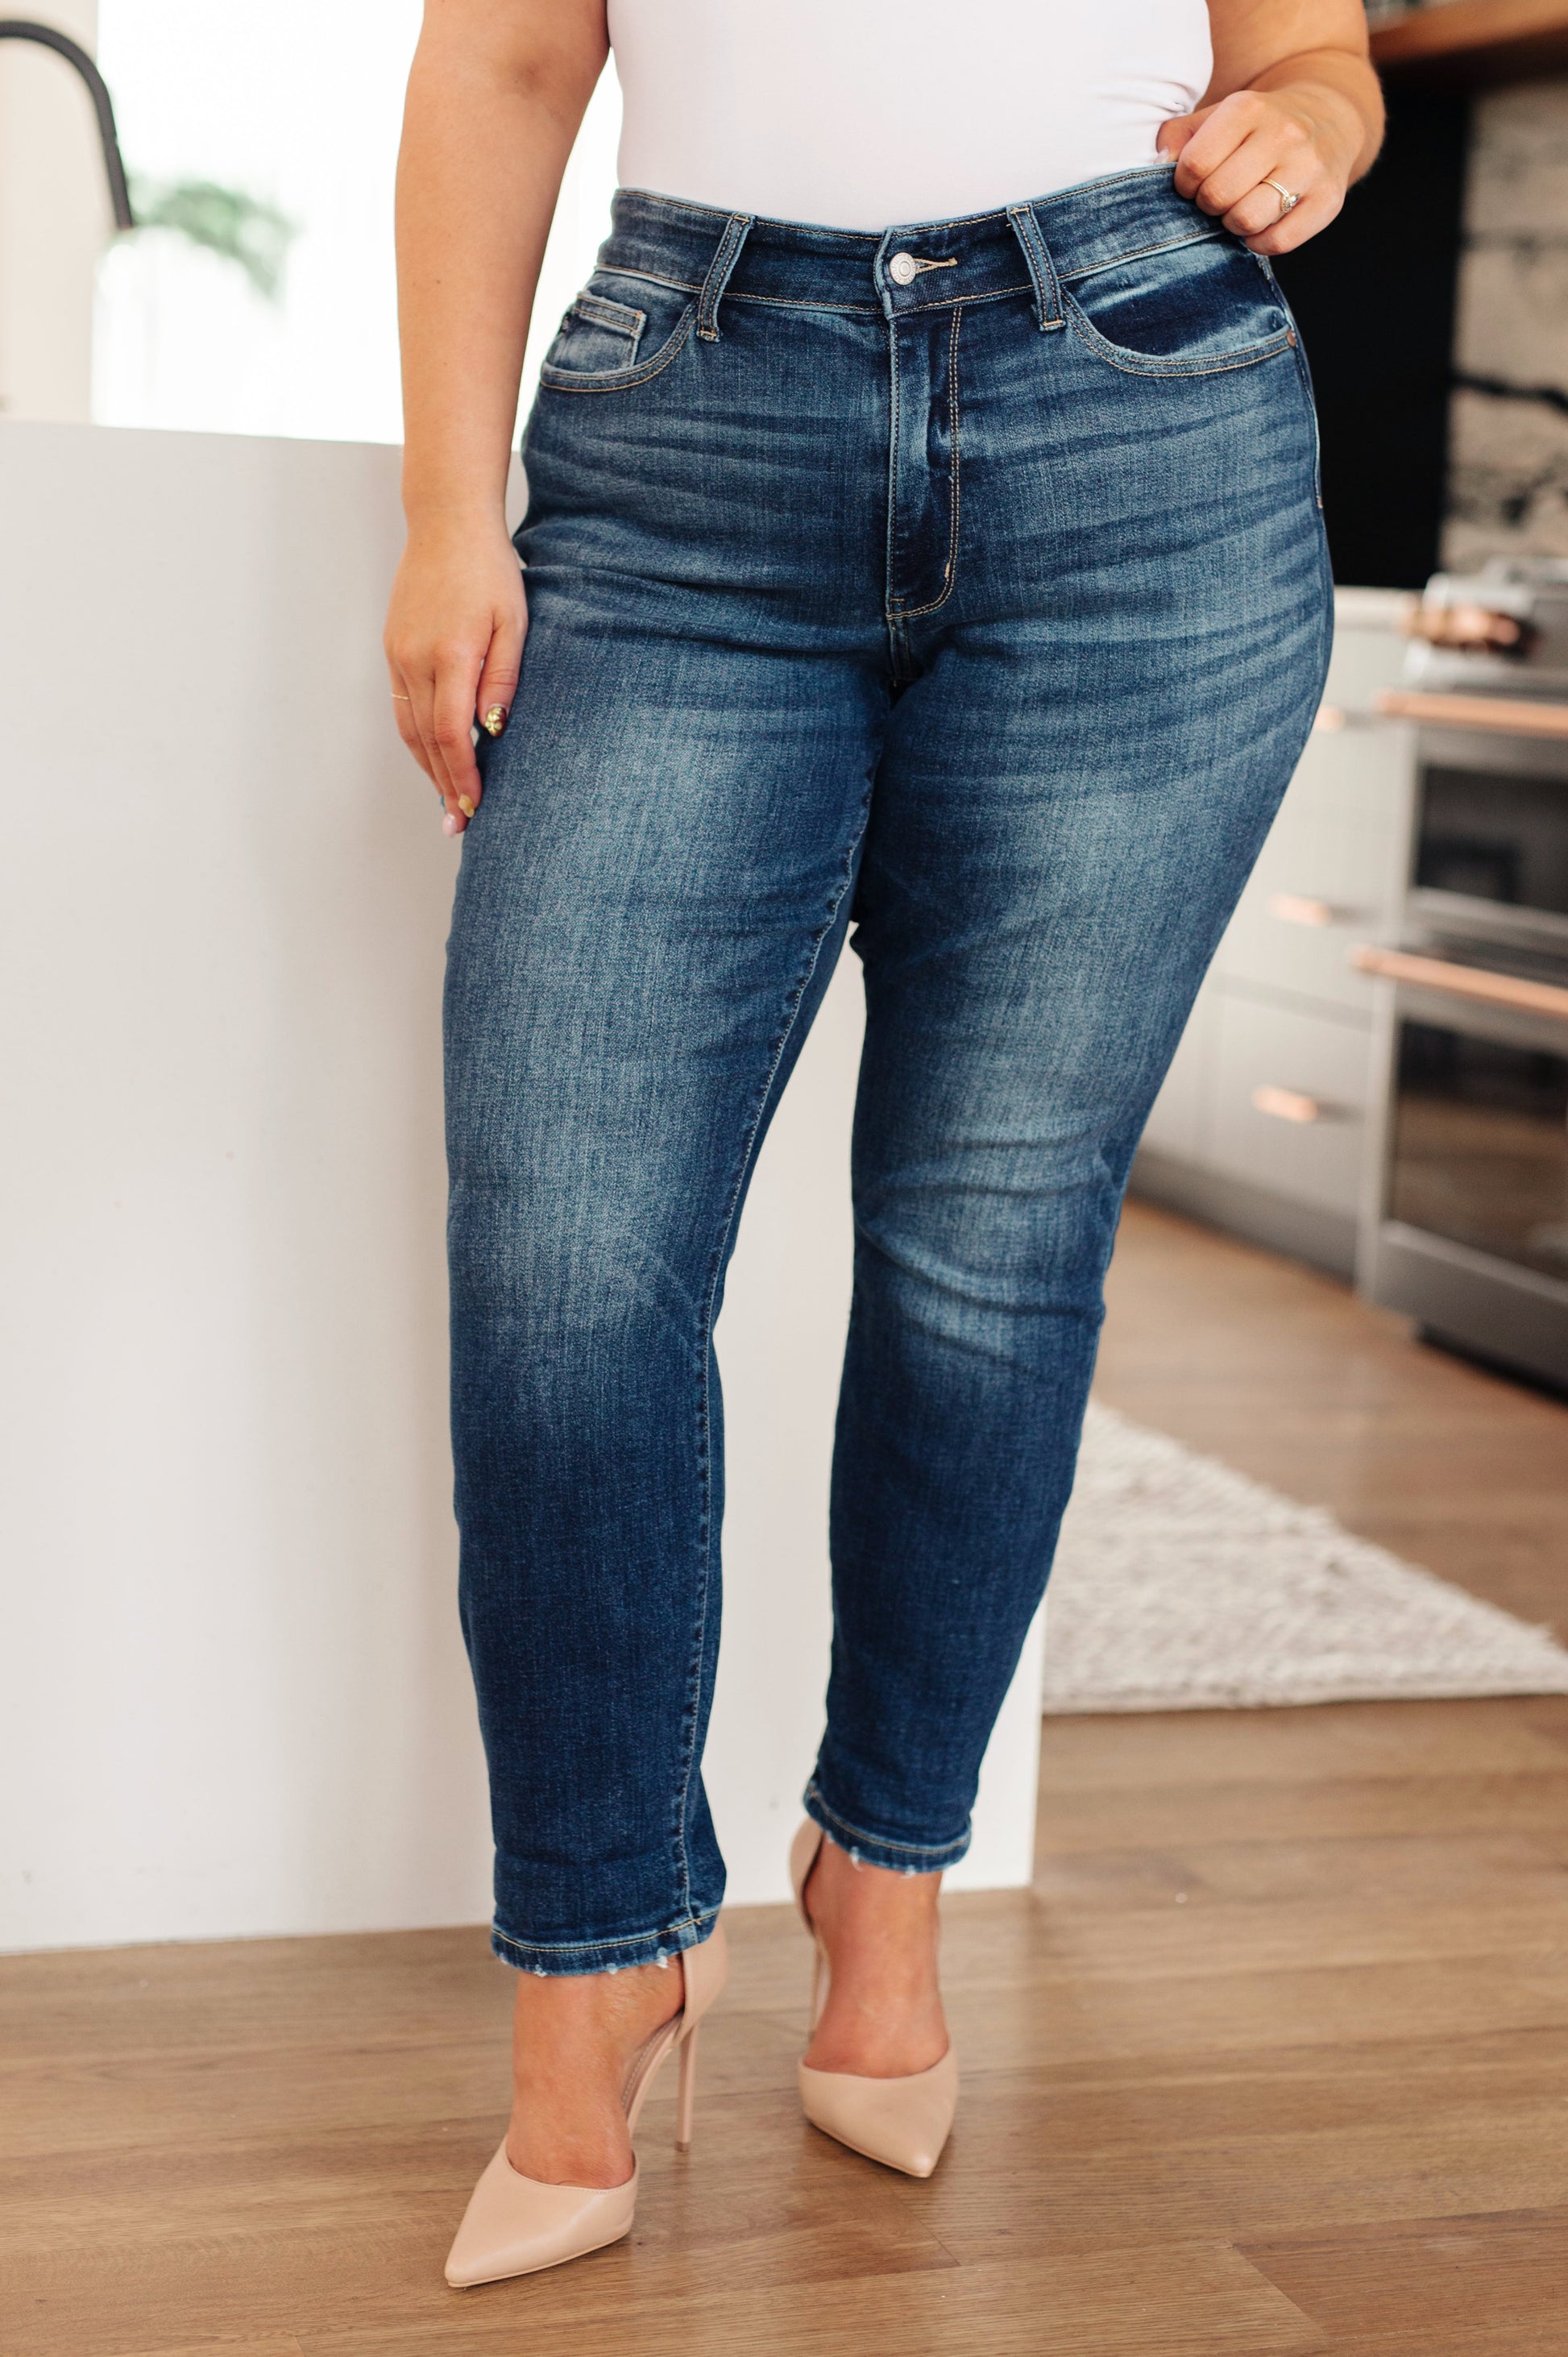 The London Boyfriend Jeans are your go to for any event life throws at ya! Made from a stretchy medium wash denim, it's hard to go wrong. Featuring a mid-rise waist with a five pocket cut, zipper fly and a loose fit-slightly tapered leg that cuffs, these classic jeans are going to become a closet staple.